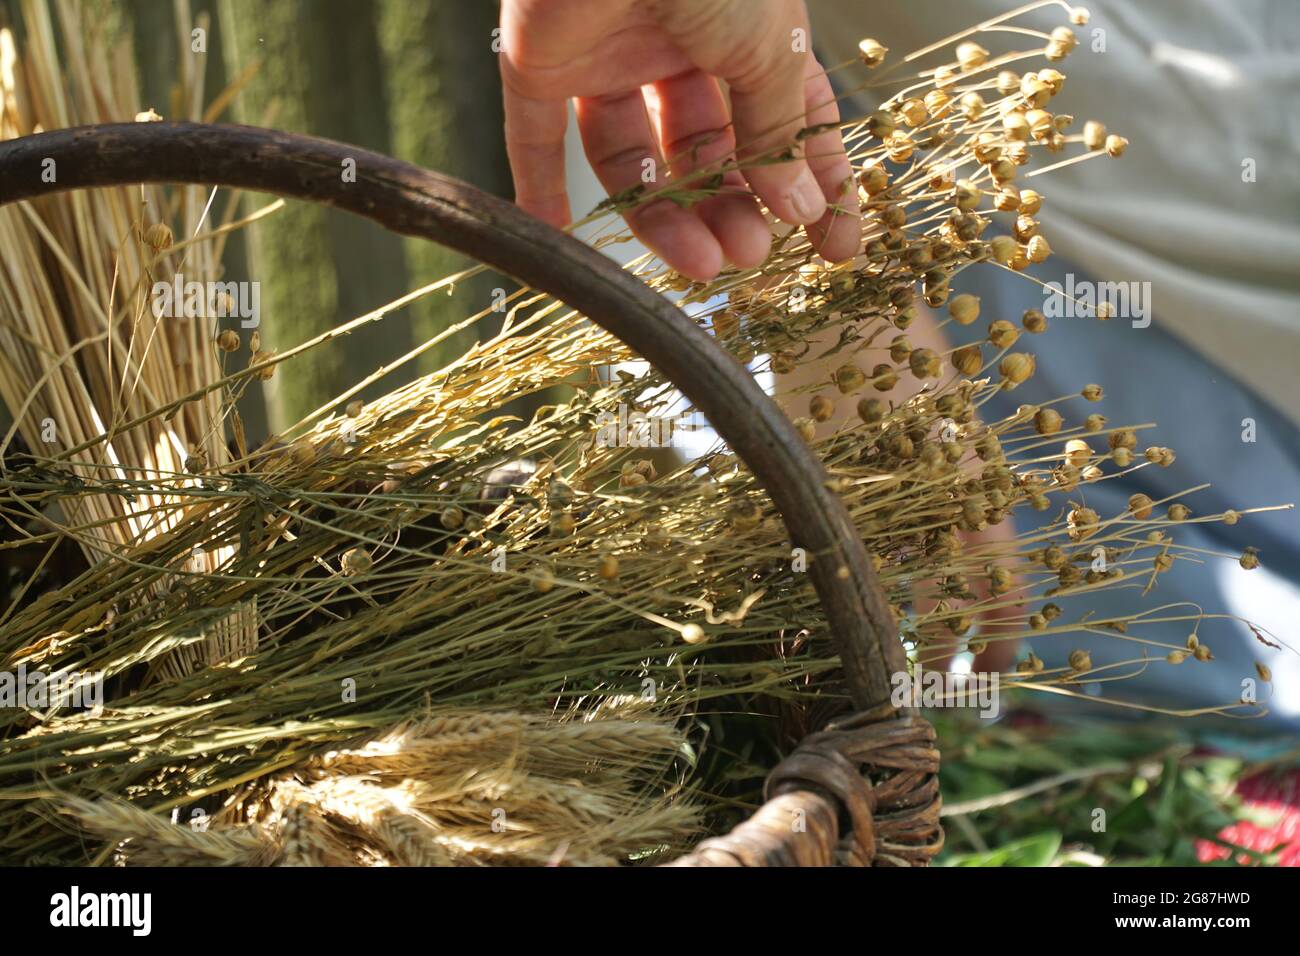 Bundles of dry cereals, flax and rye in the wicker basket. Organic farming. Agriculture. Stock Photo